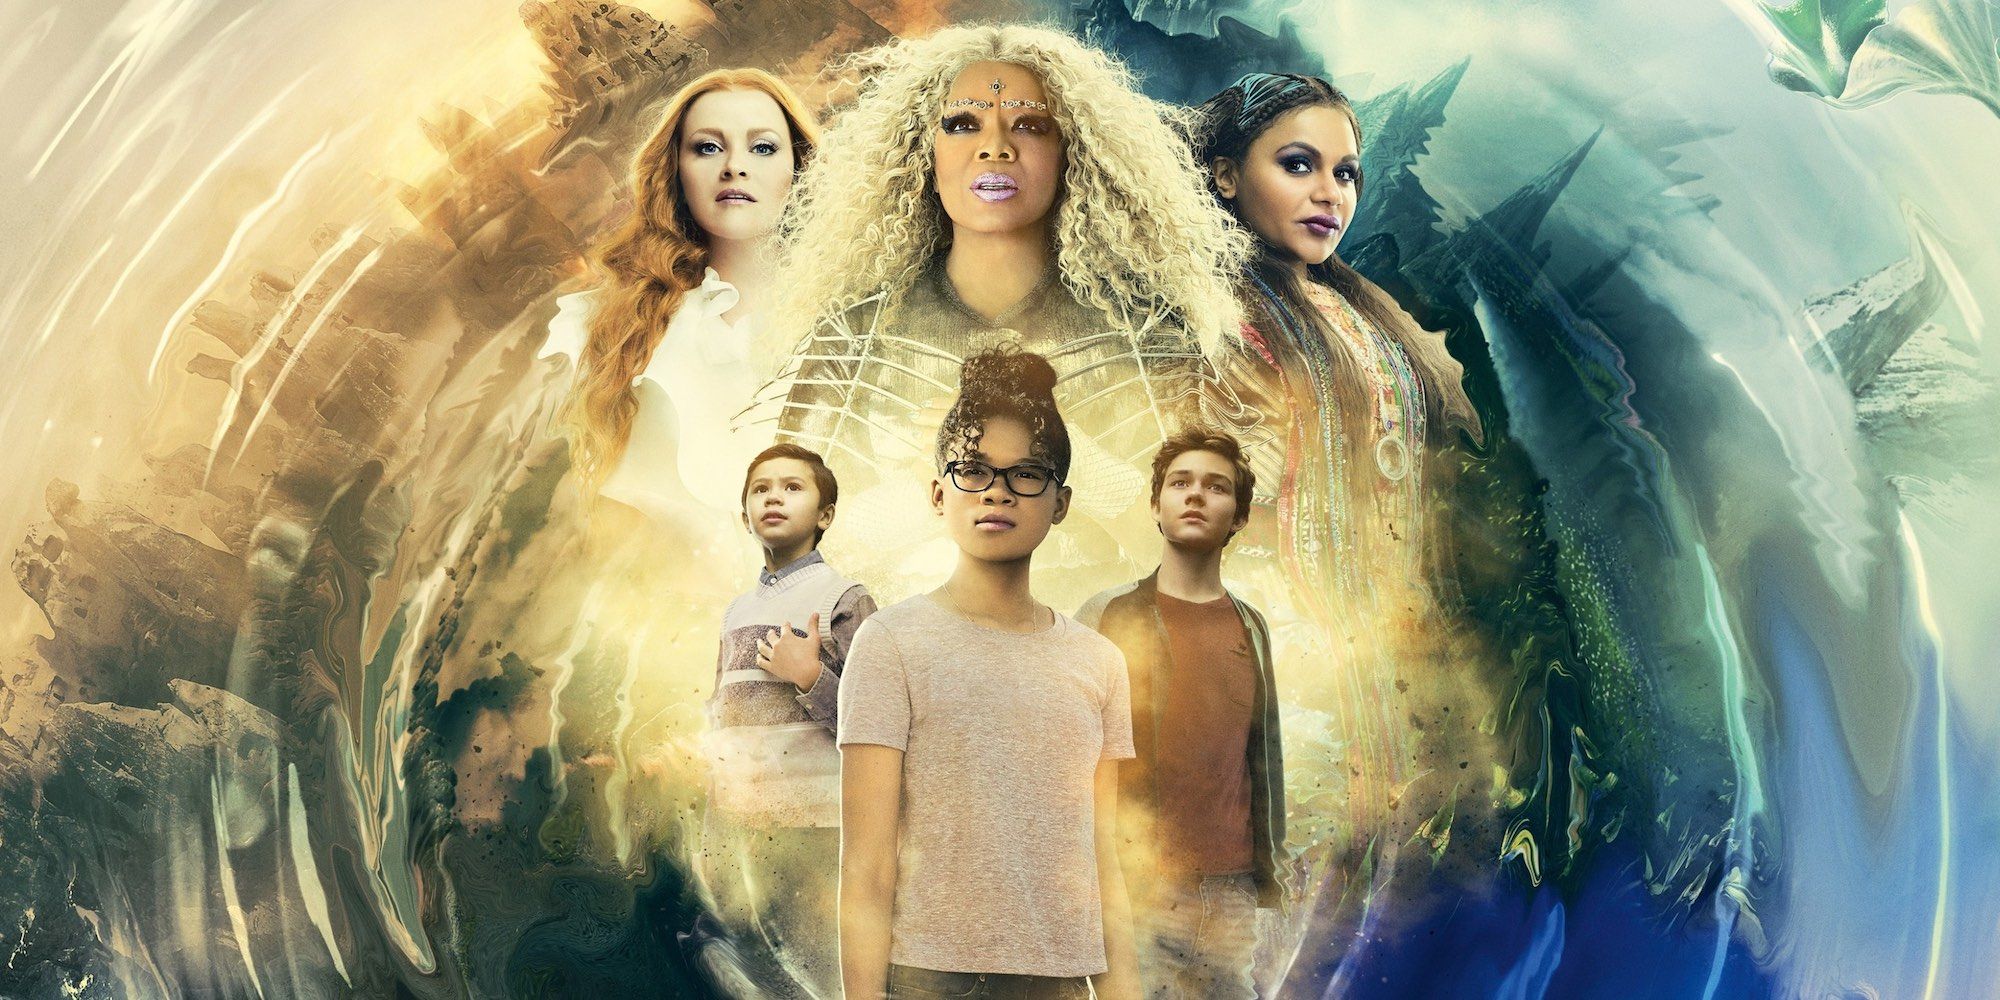 wrinkle in time movie review